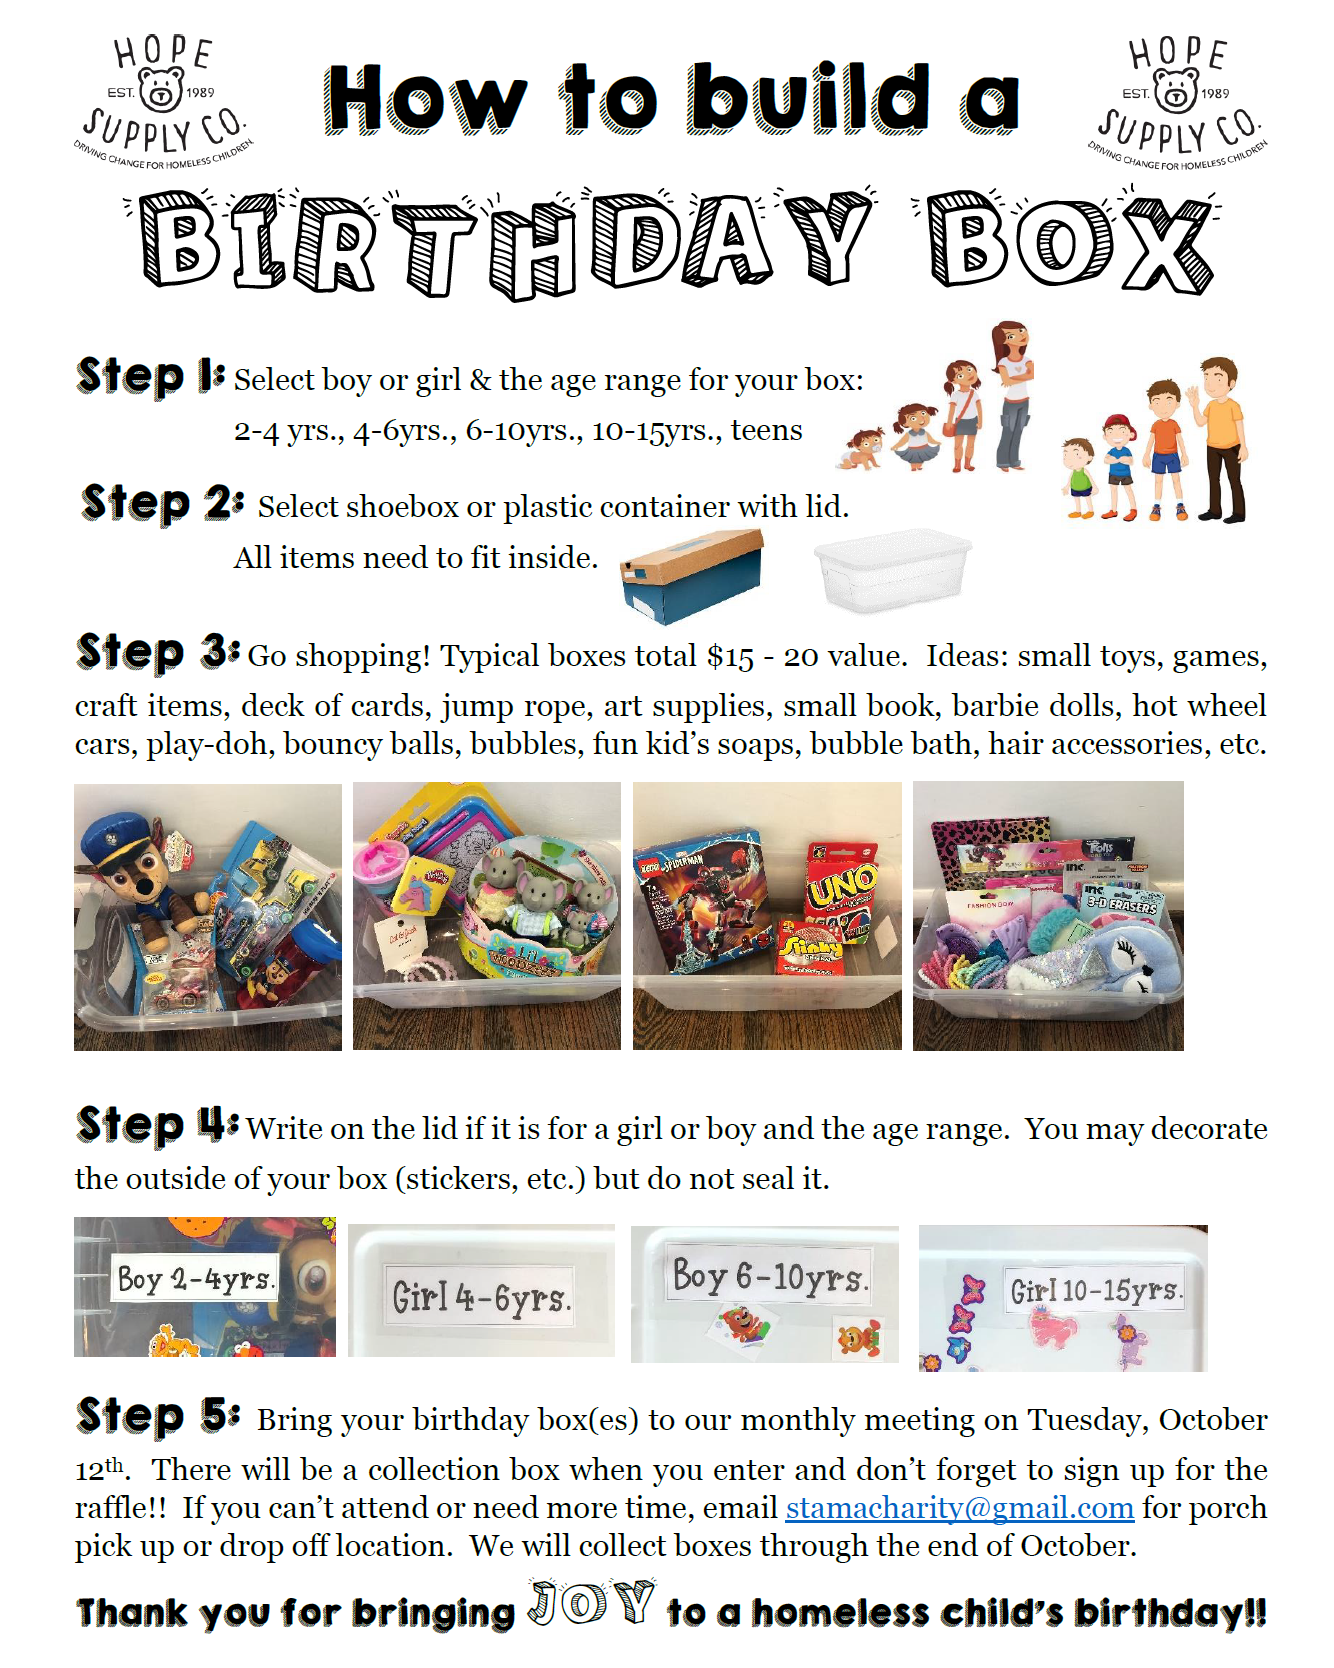 Instructions on how to build a Birthday Box for Children